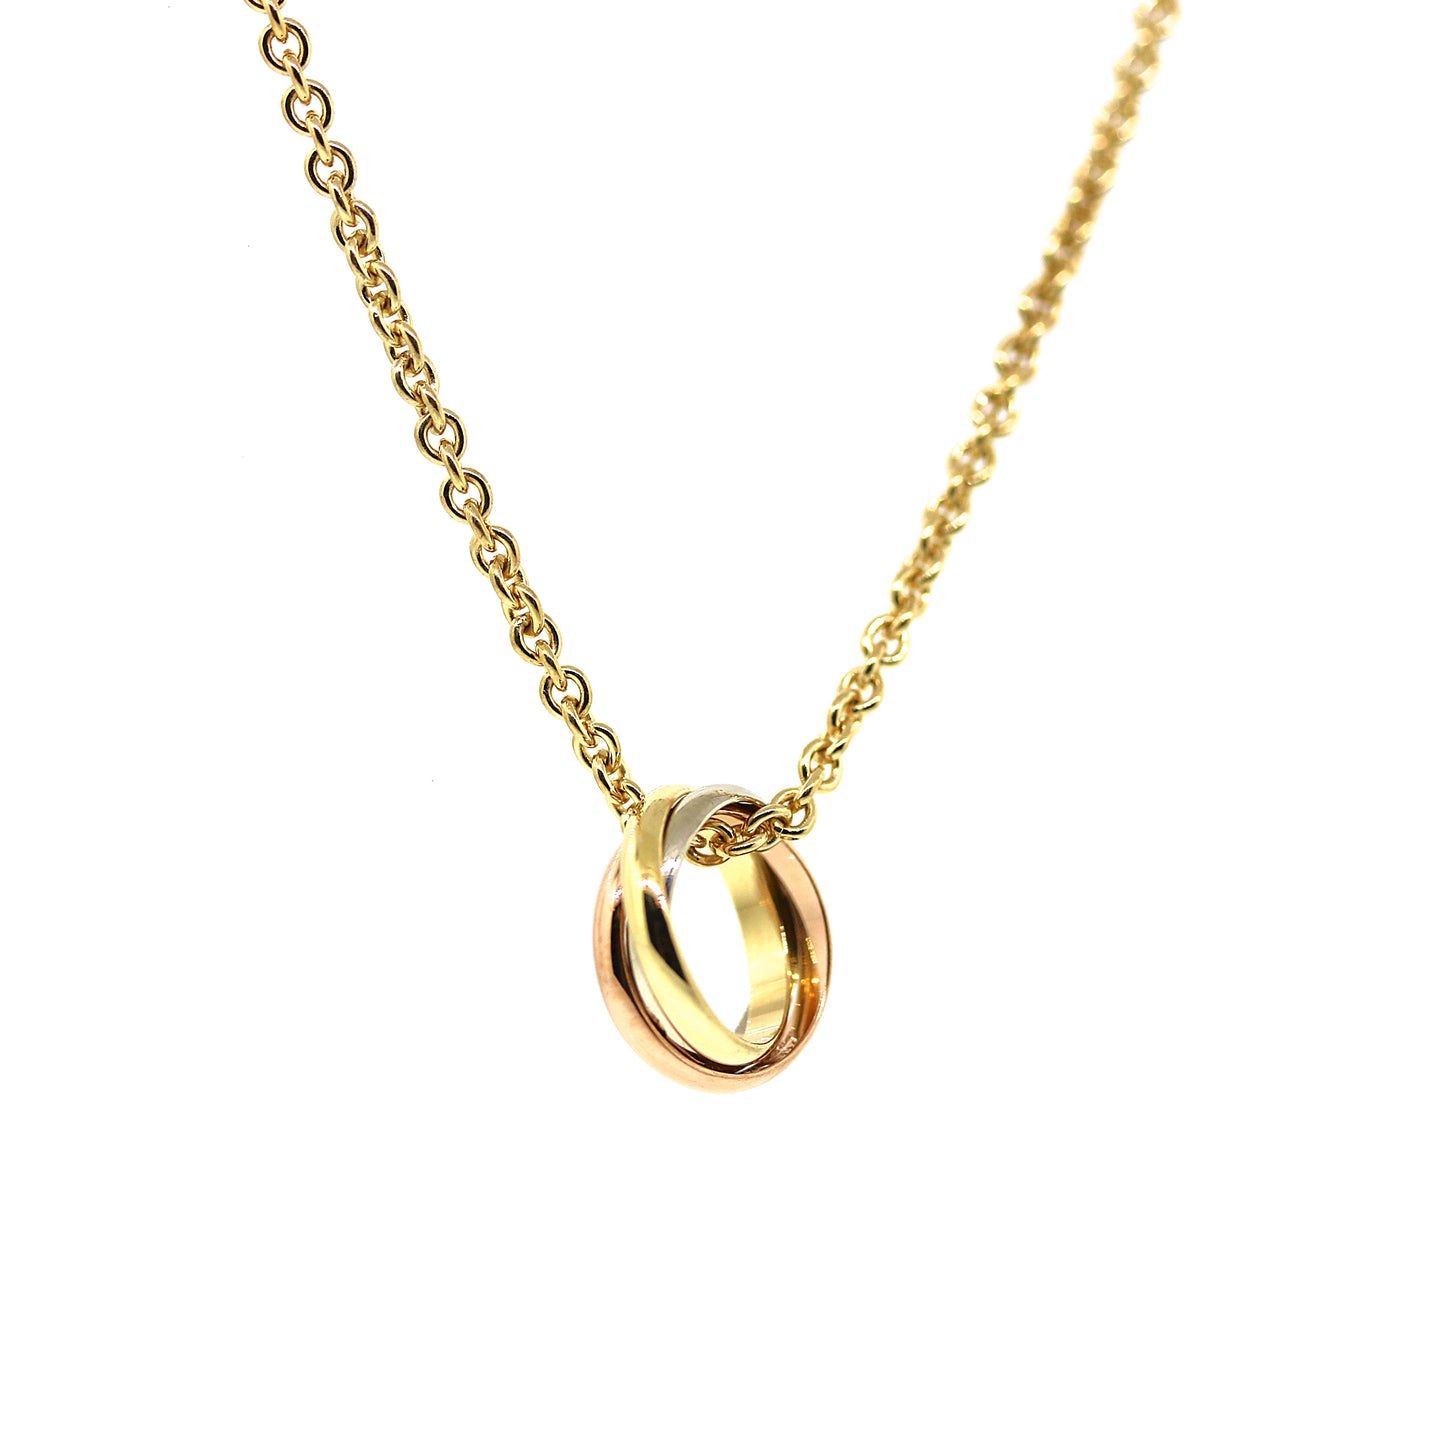 Preowned Cartier Trinity Gold Necklace